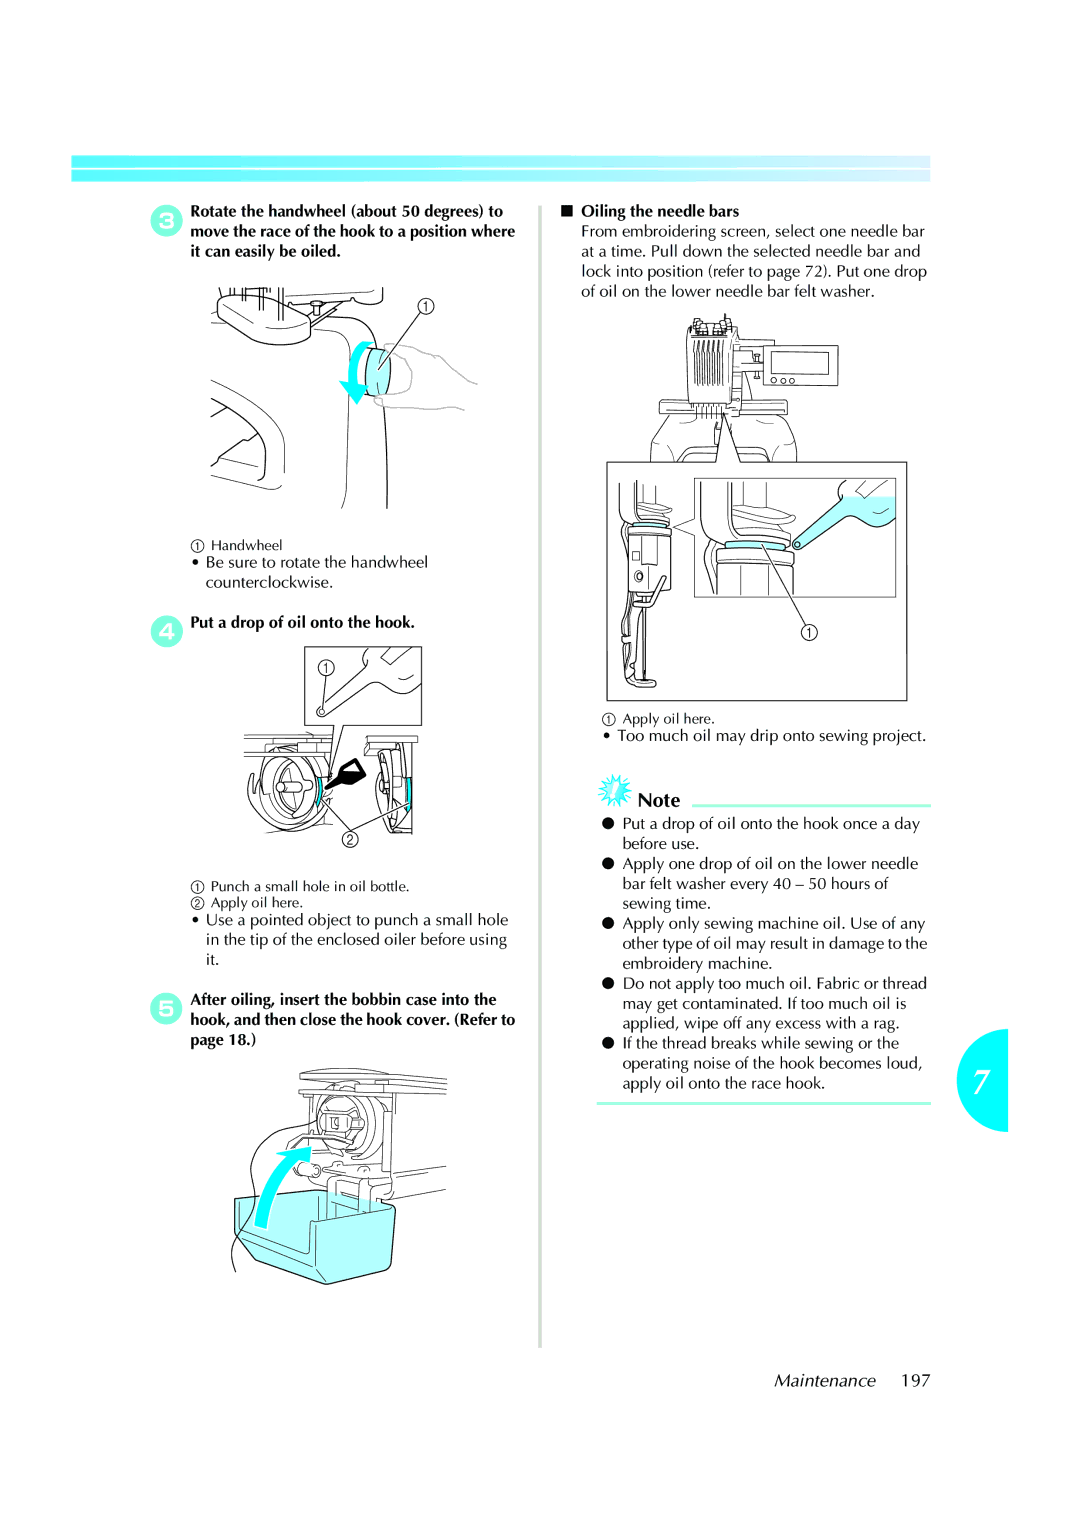 Brother PR-620 operation manual Be sure to rotate the handwheel counterclockwise, Put a drop of oil onto the hook 